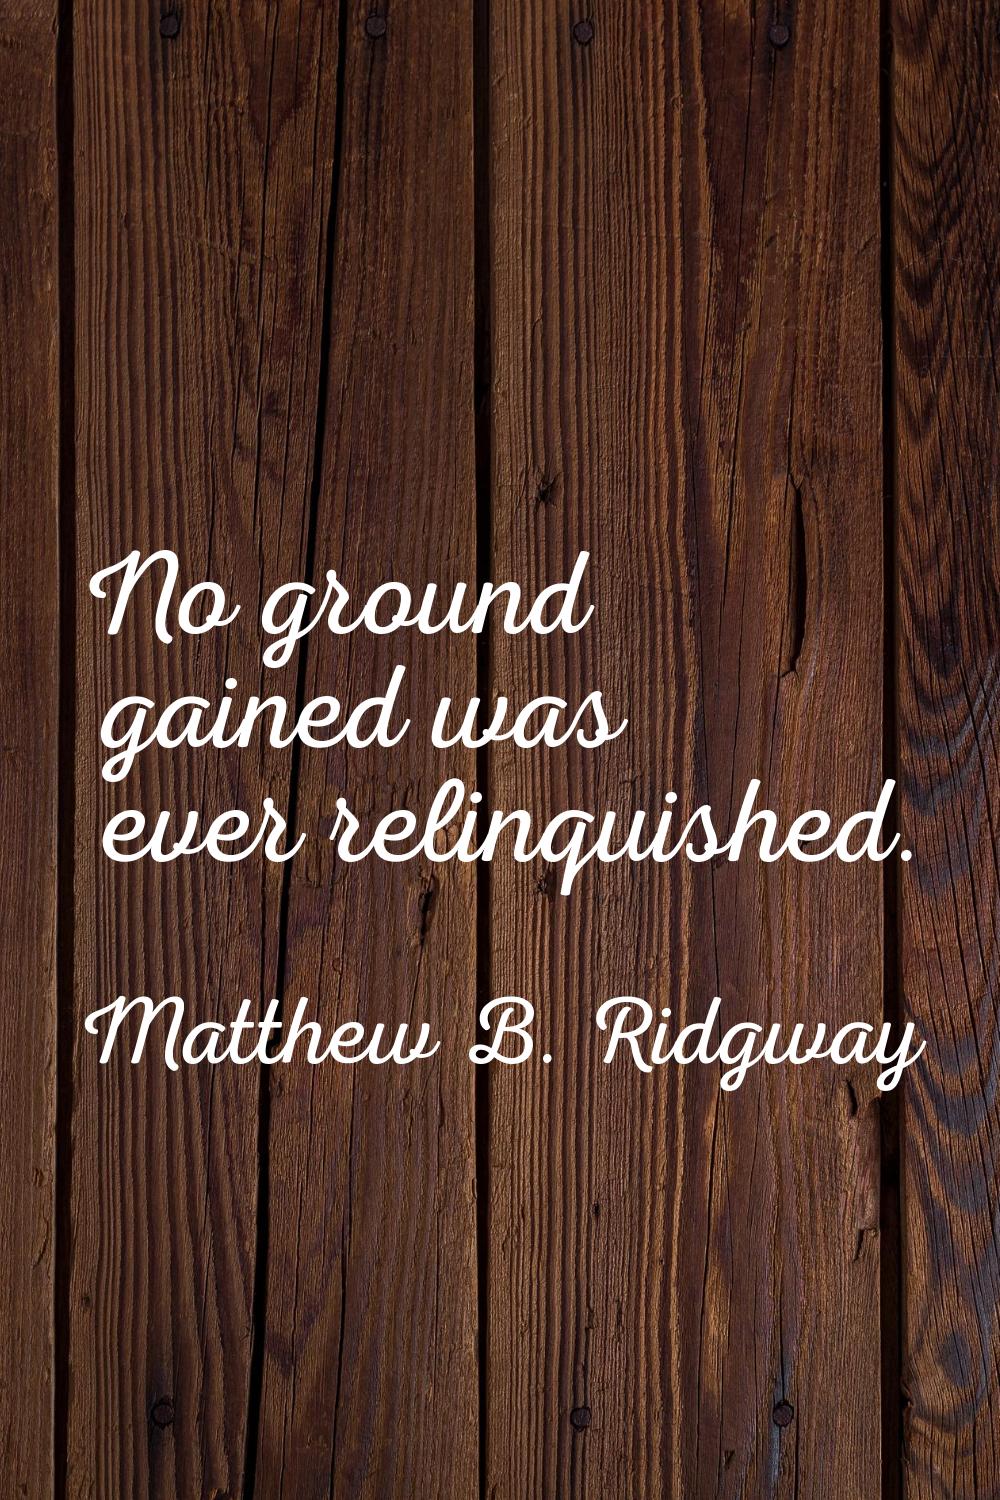 No ground gained was ever relinquished.